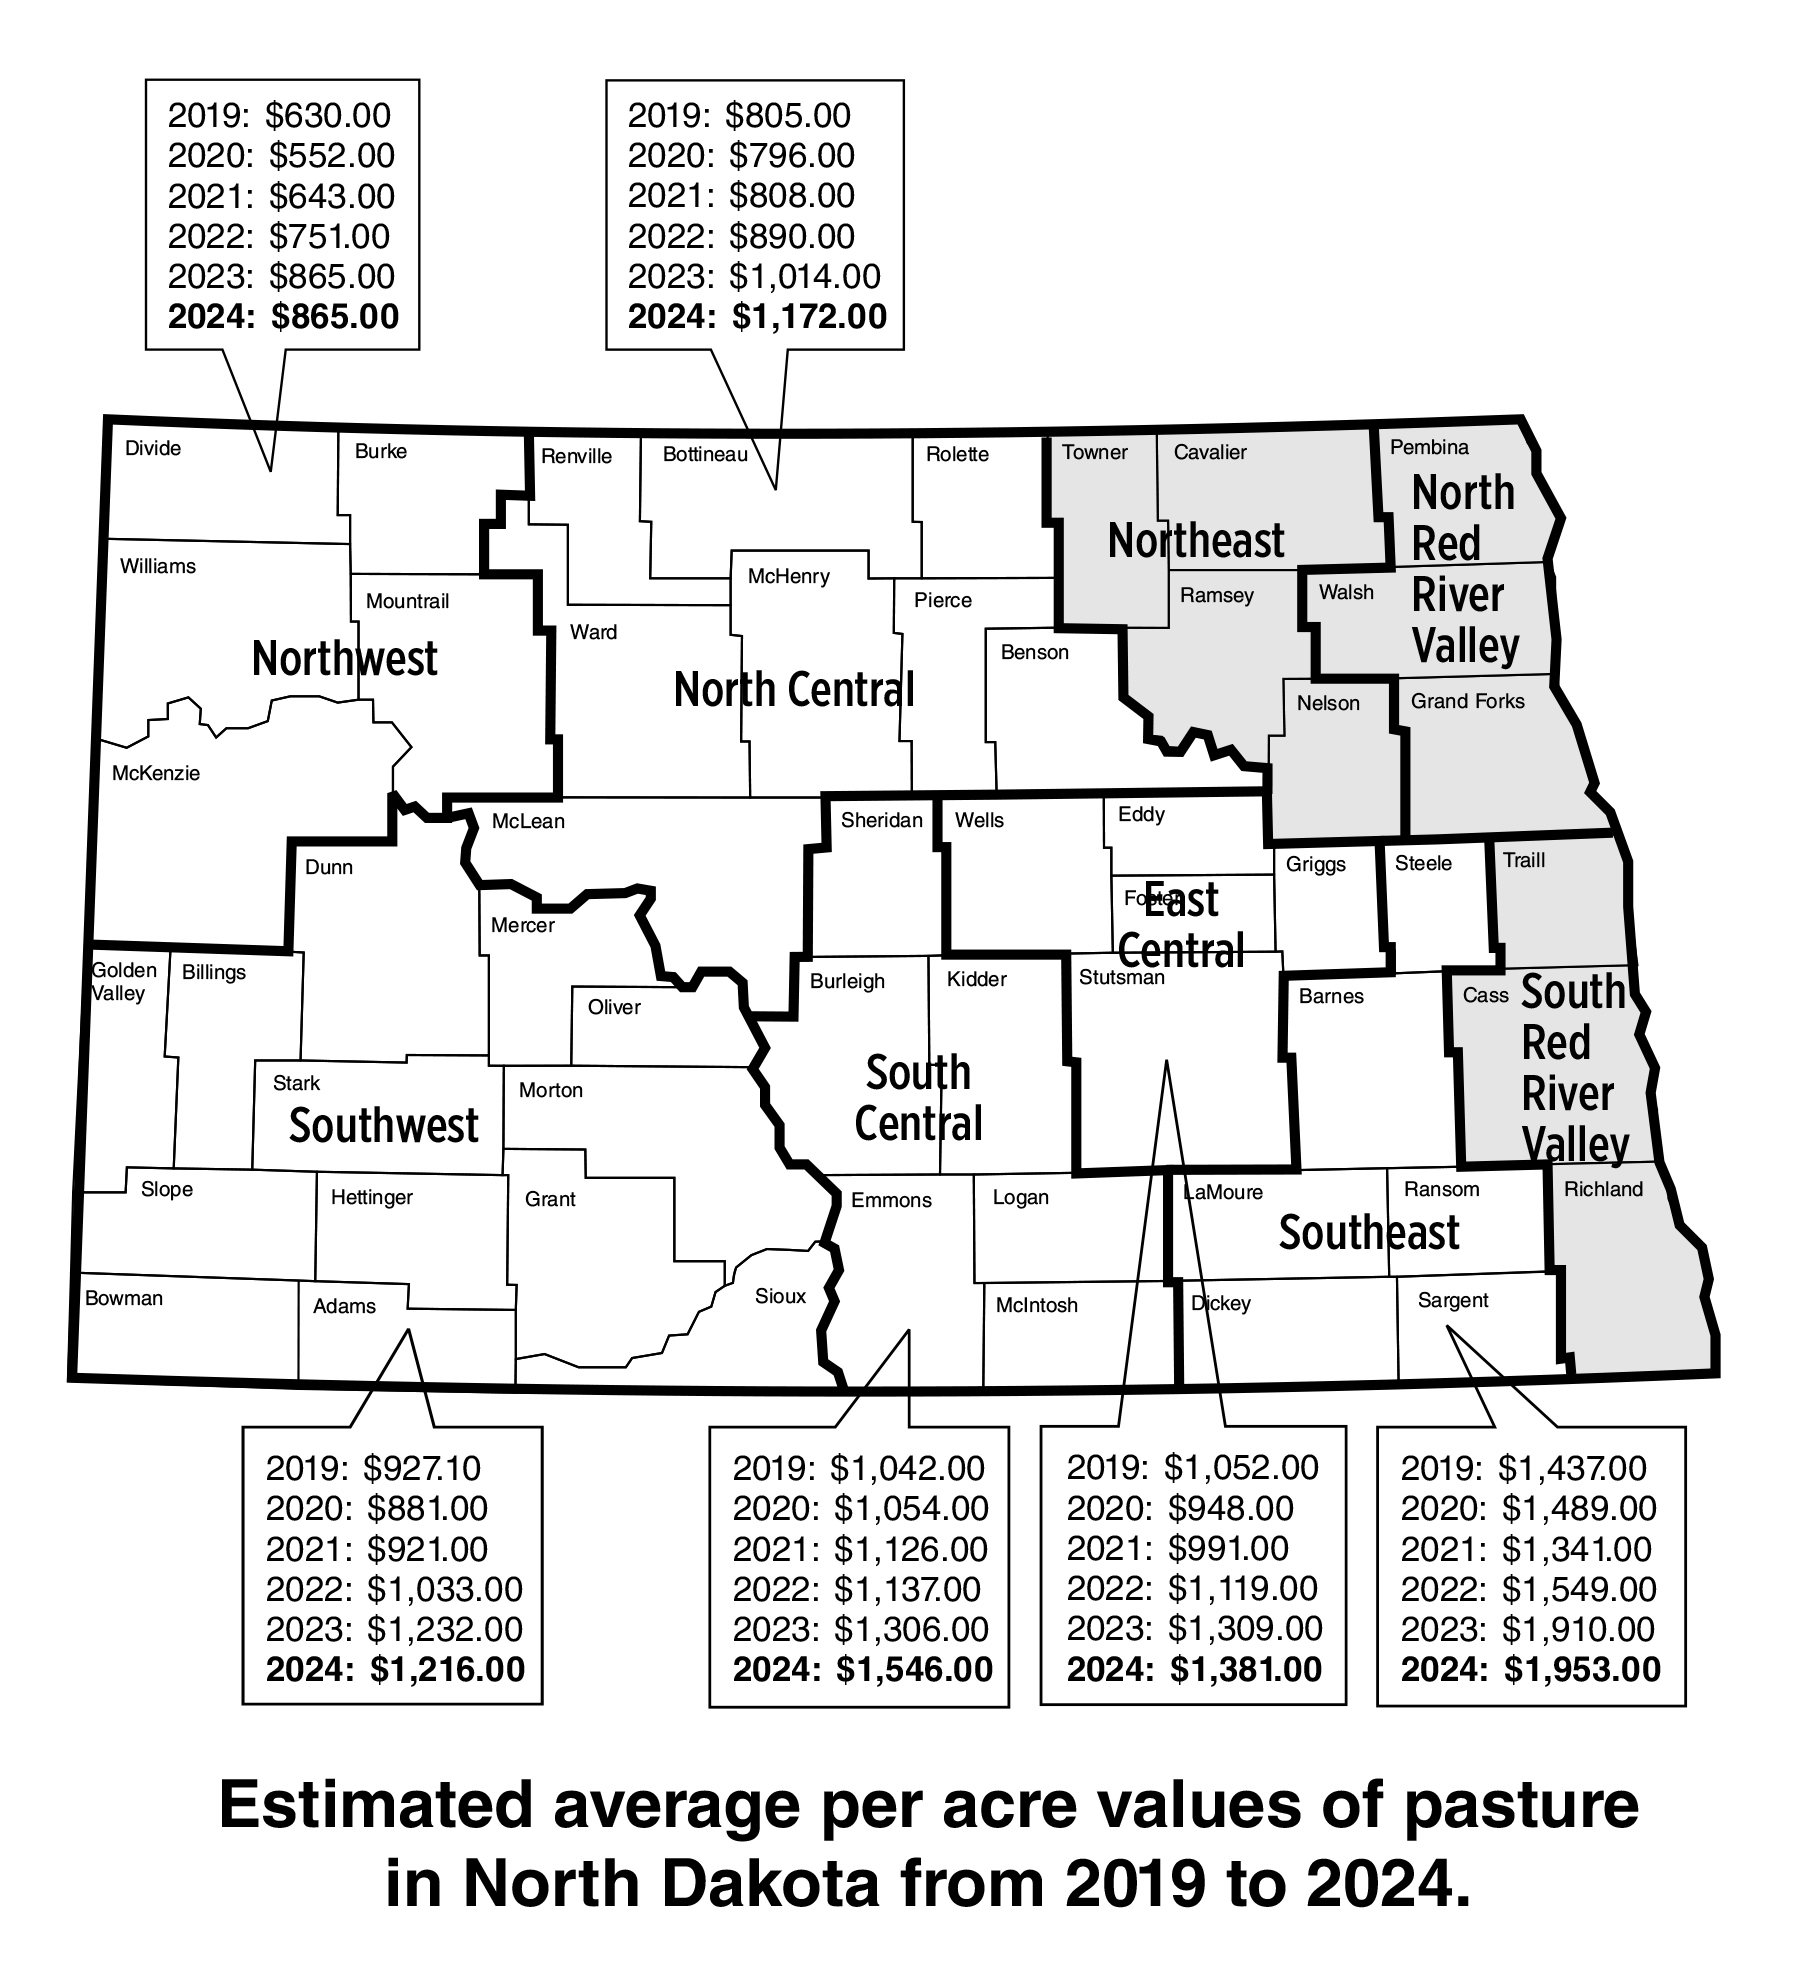 Estimated average per acre values of pasture in North Dakota from 2019 to 2024. (NDSU photo)